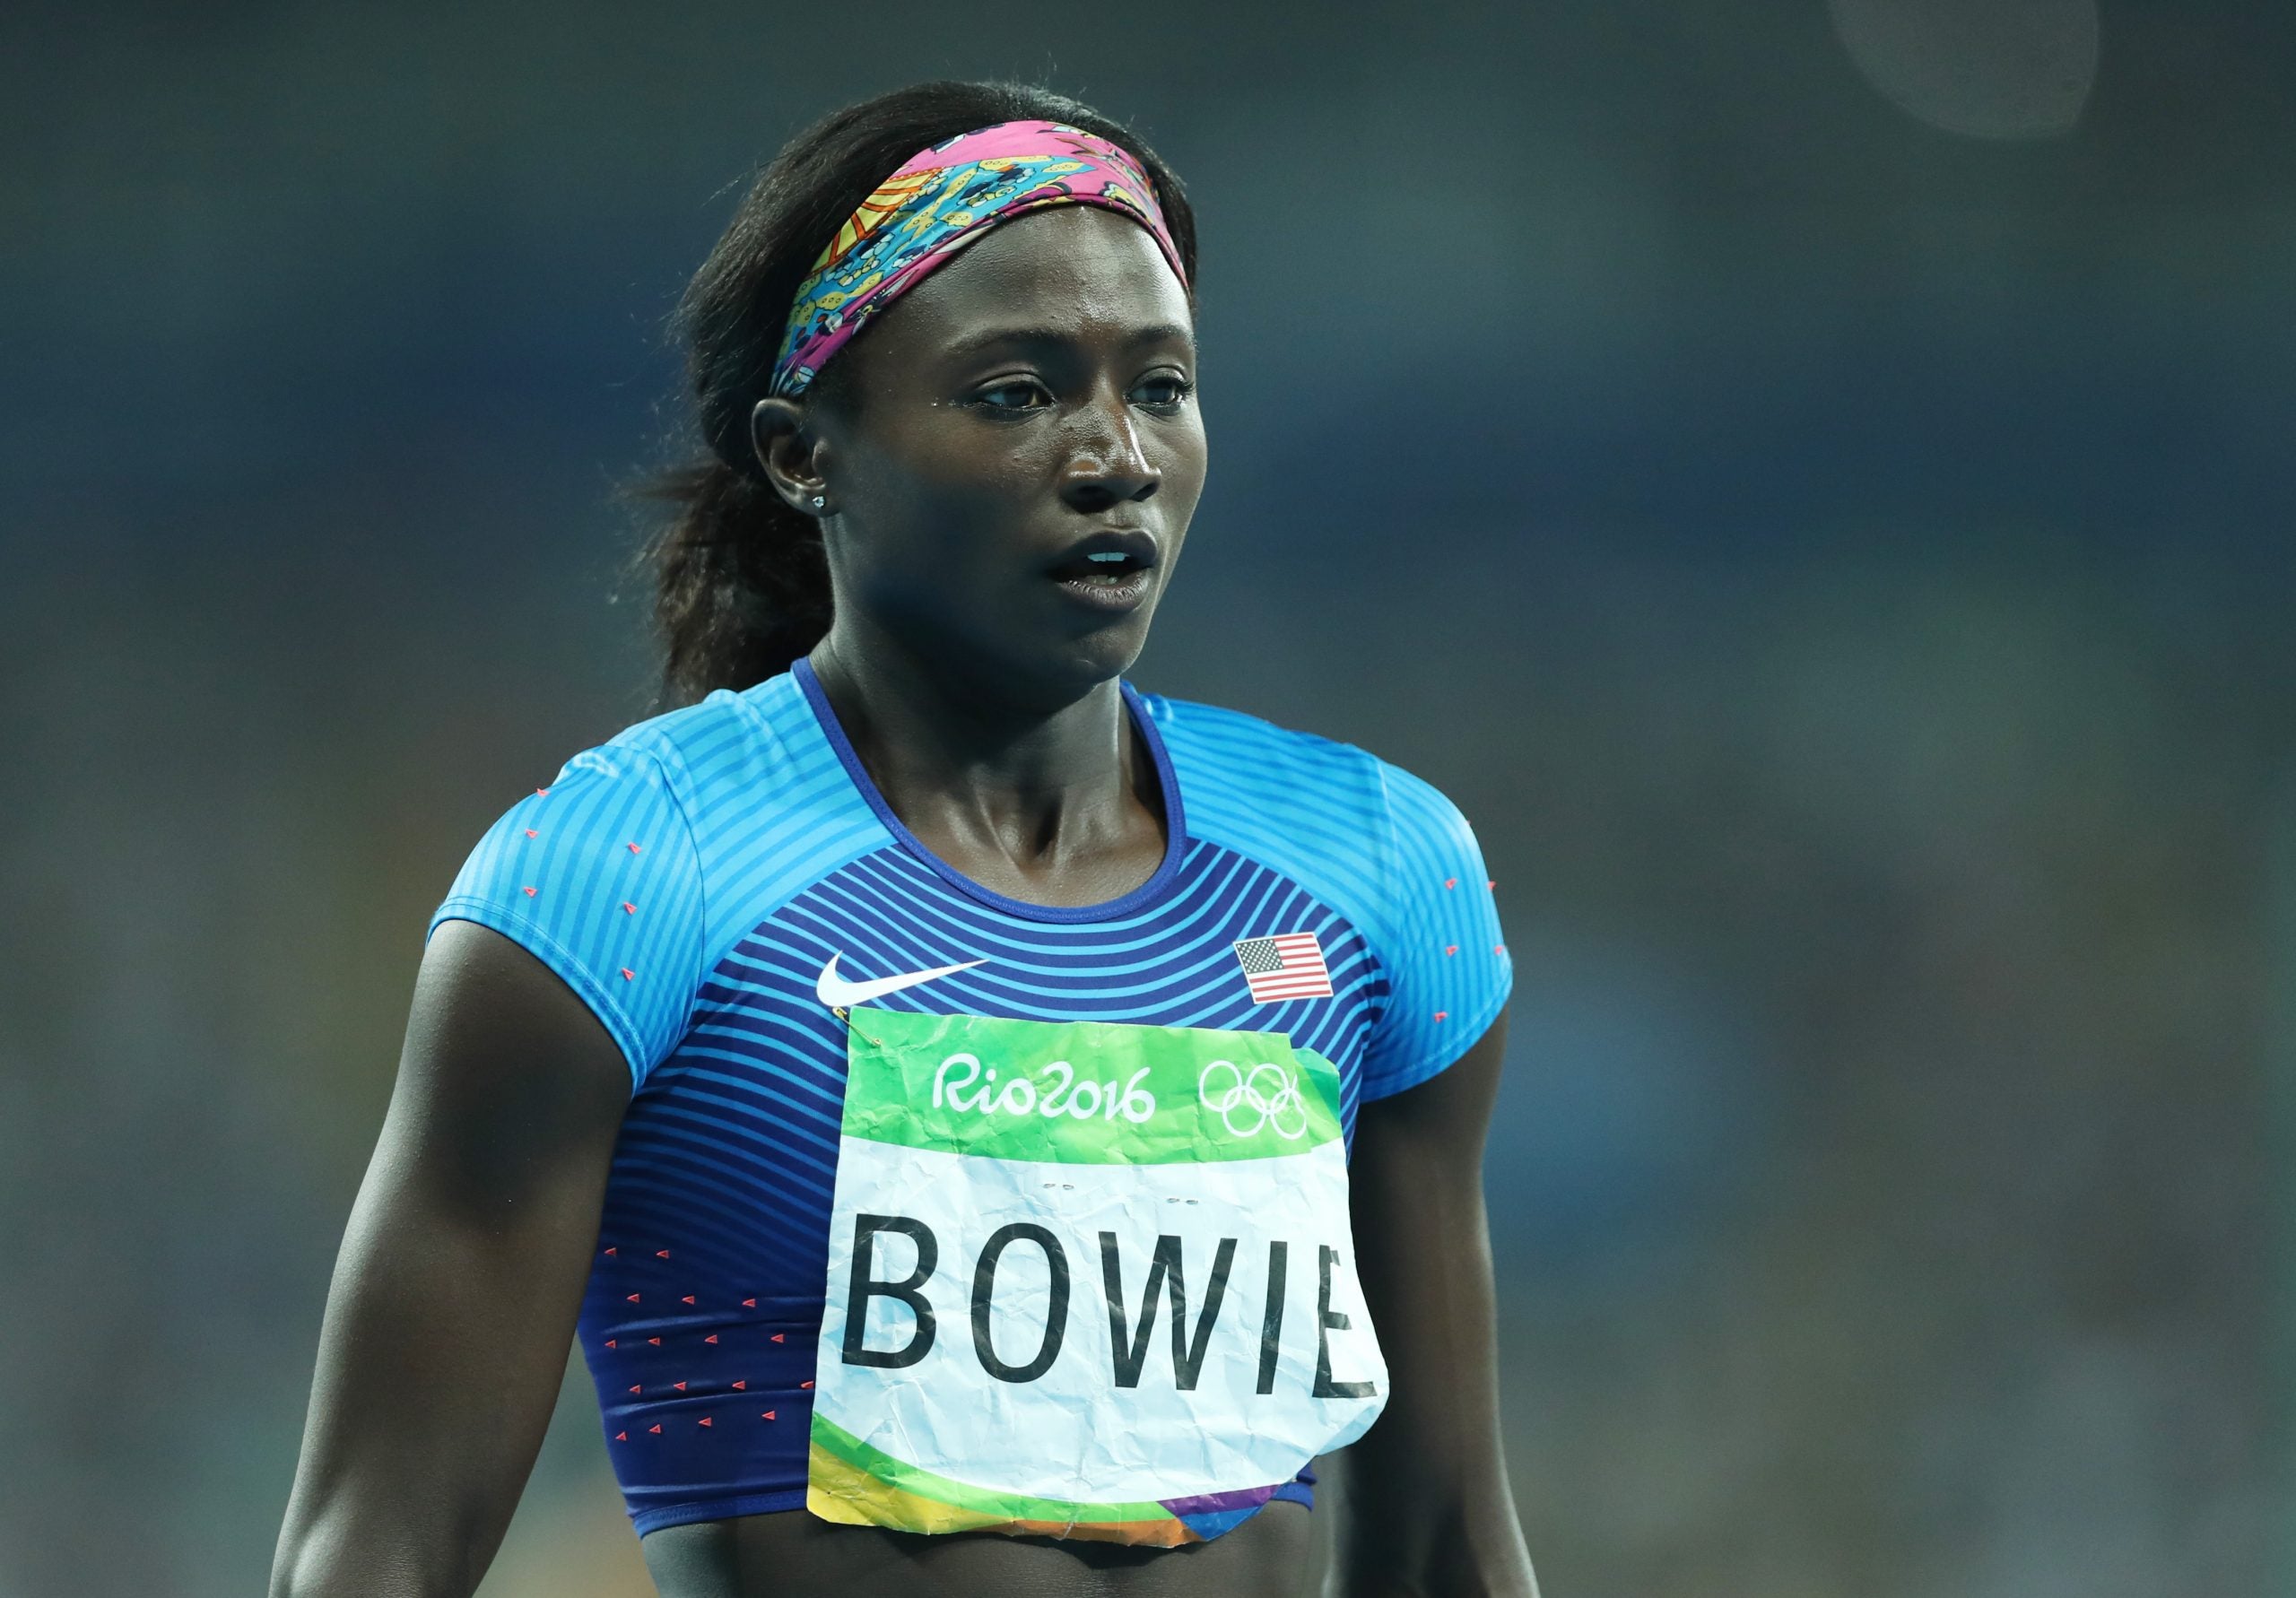 U.S. Olympian Tori Bowie Died Due To Complications From Childbirth